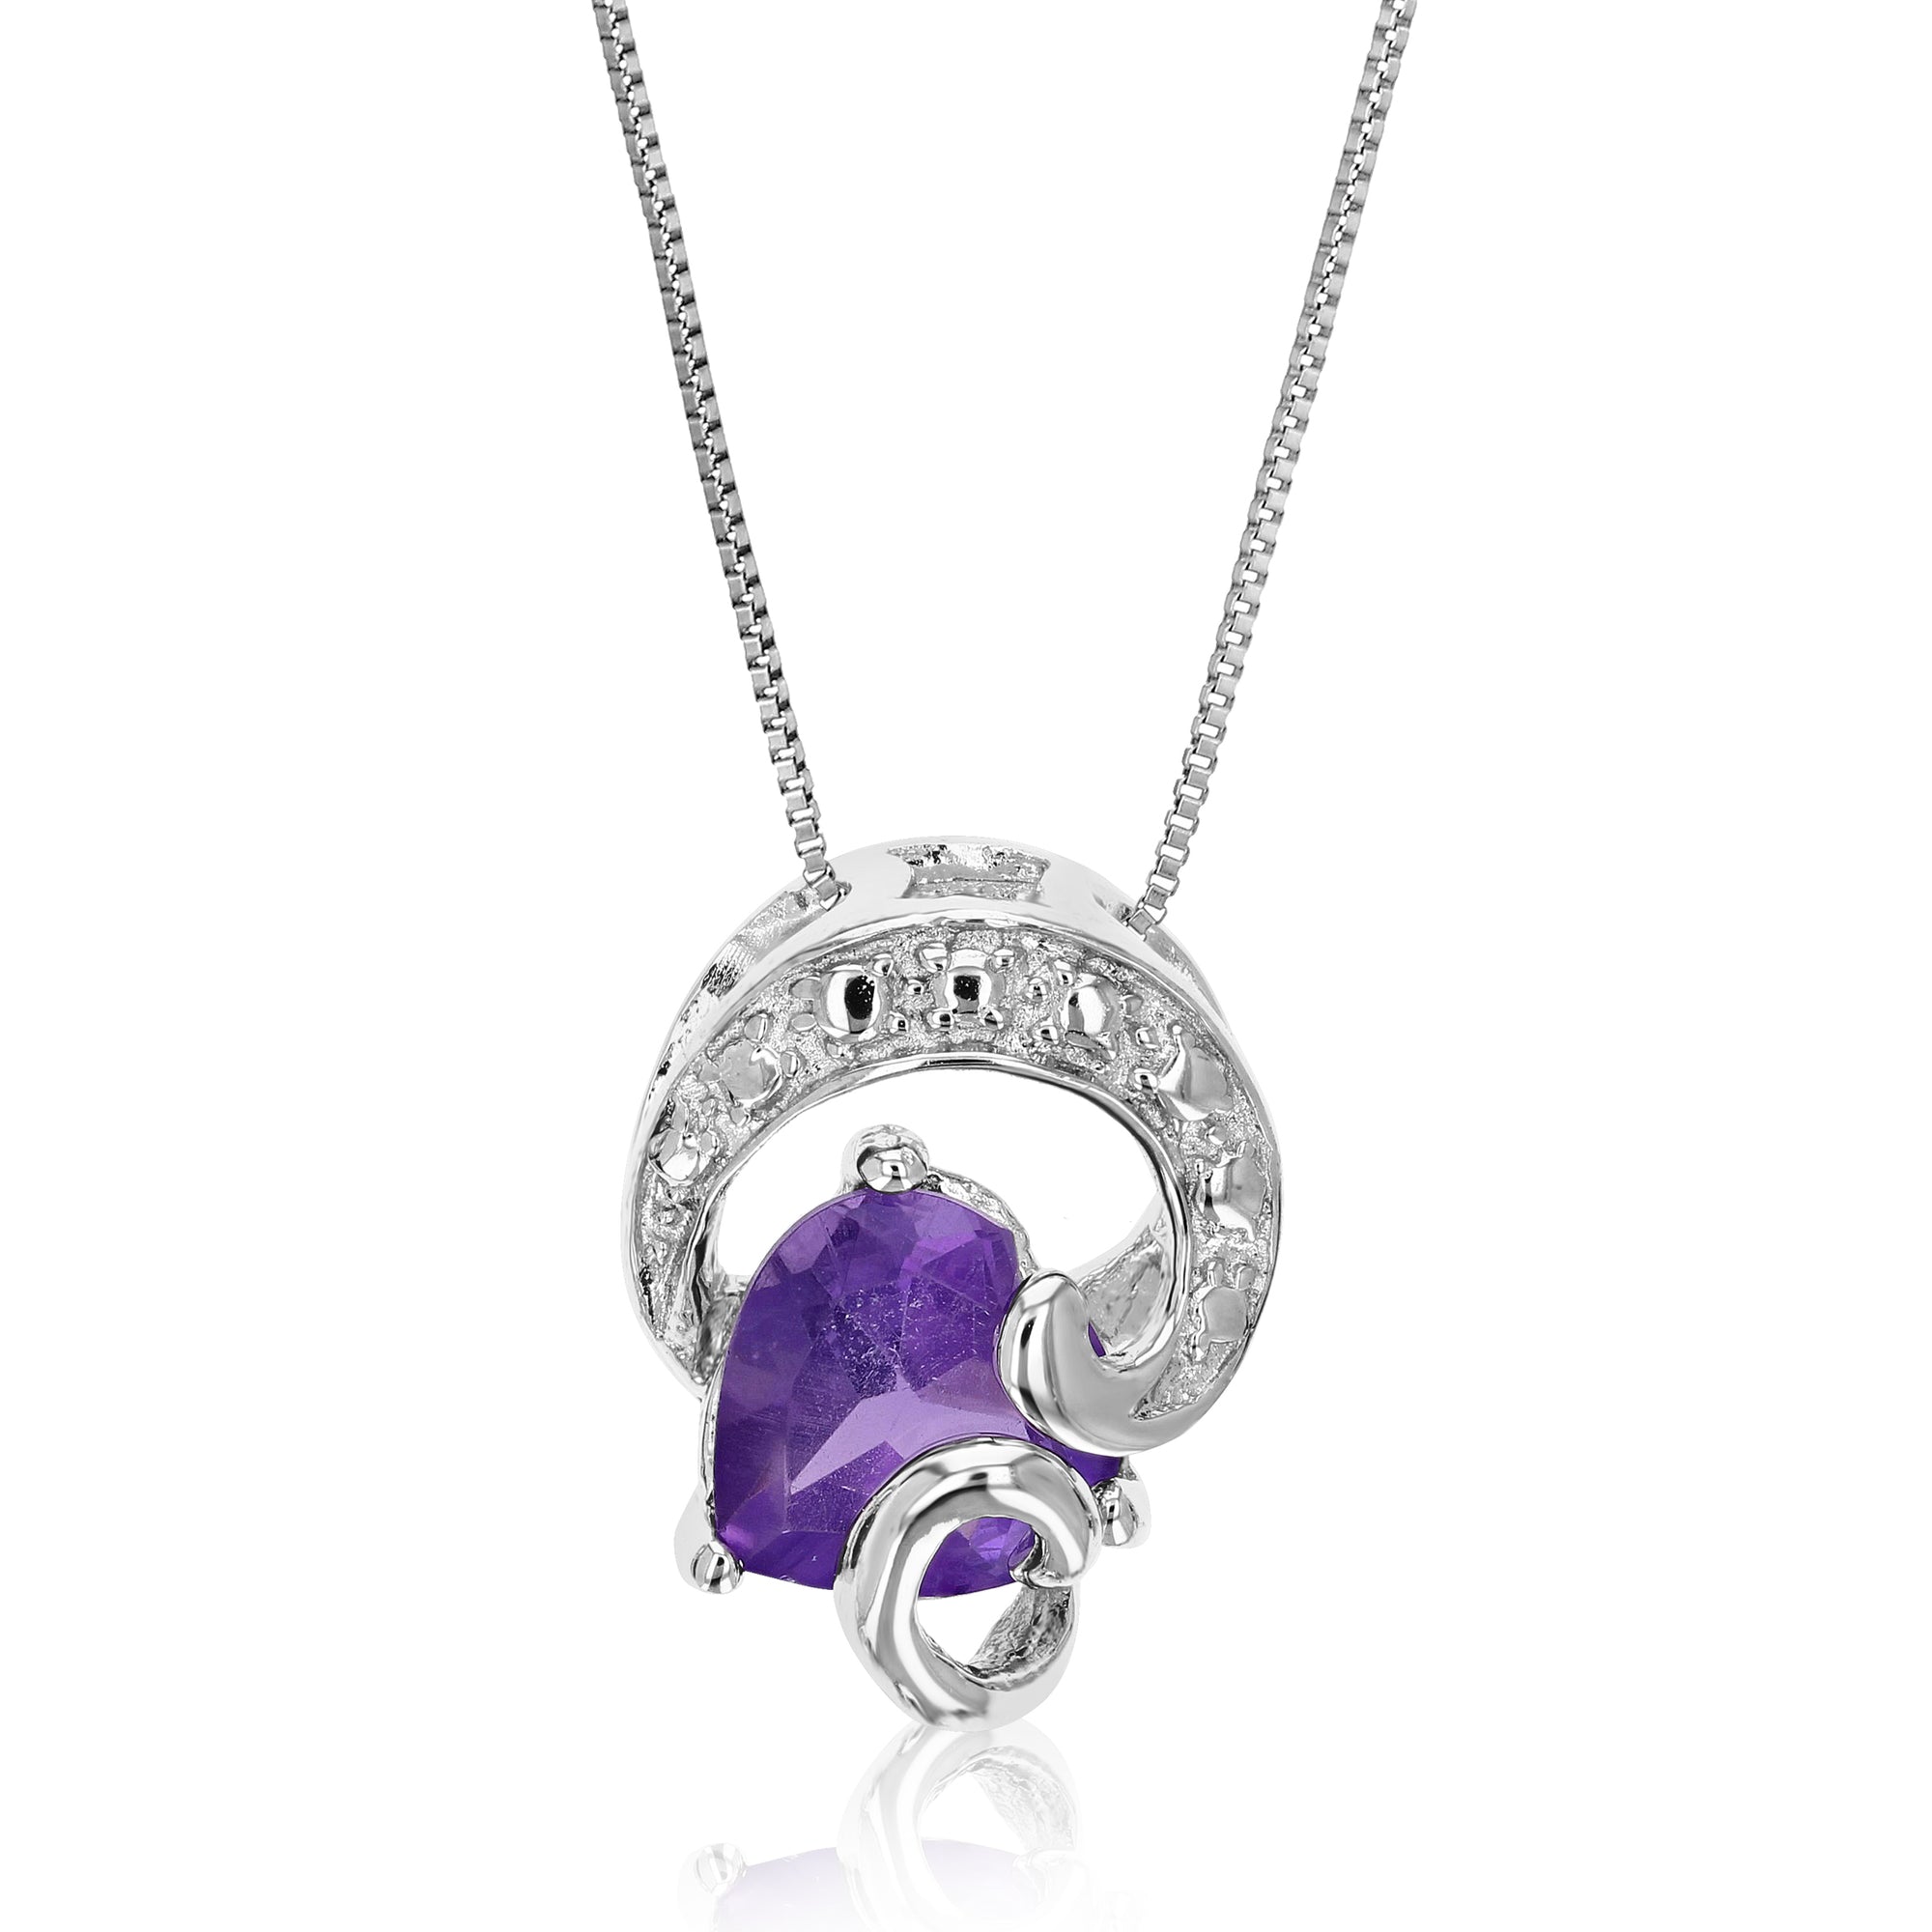 0.70 cttw Pendant Necklace, Purple Amethyst Heart Pendant Necklace for Women in .925 Sterling Silver with Rhodium, 18 Inch Chain, Prong Setting